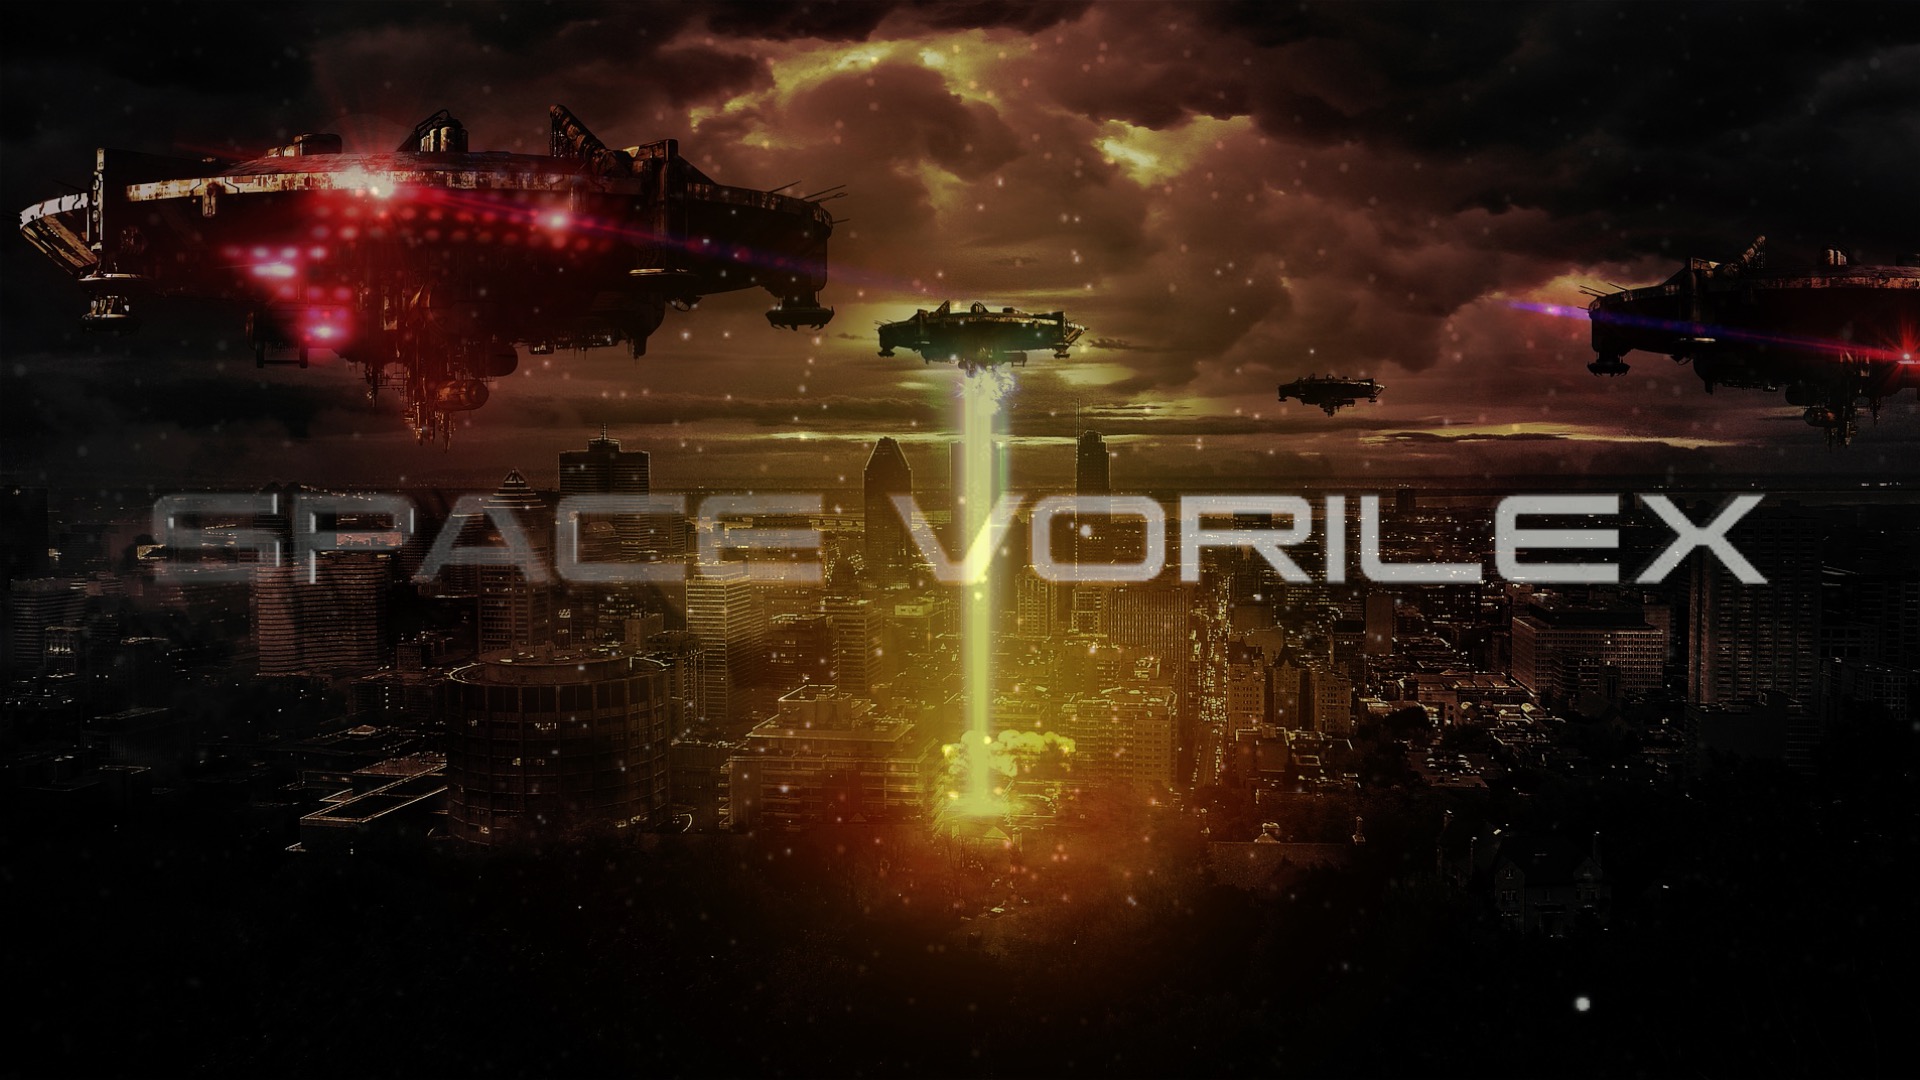 2b Acting’s first selective interactive video game, Space Vorilex